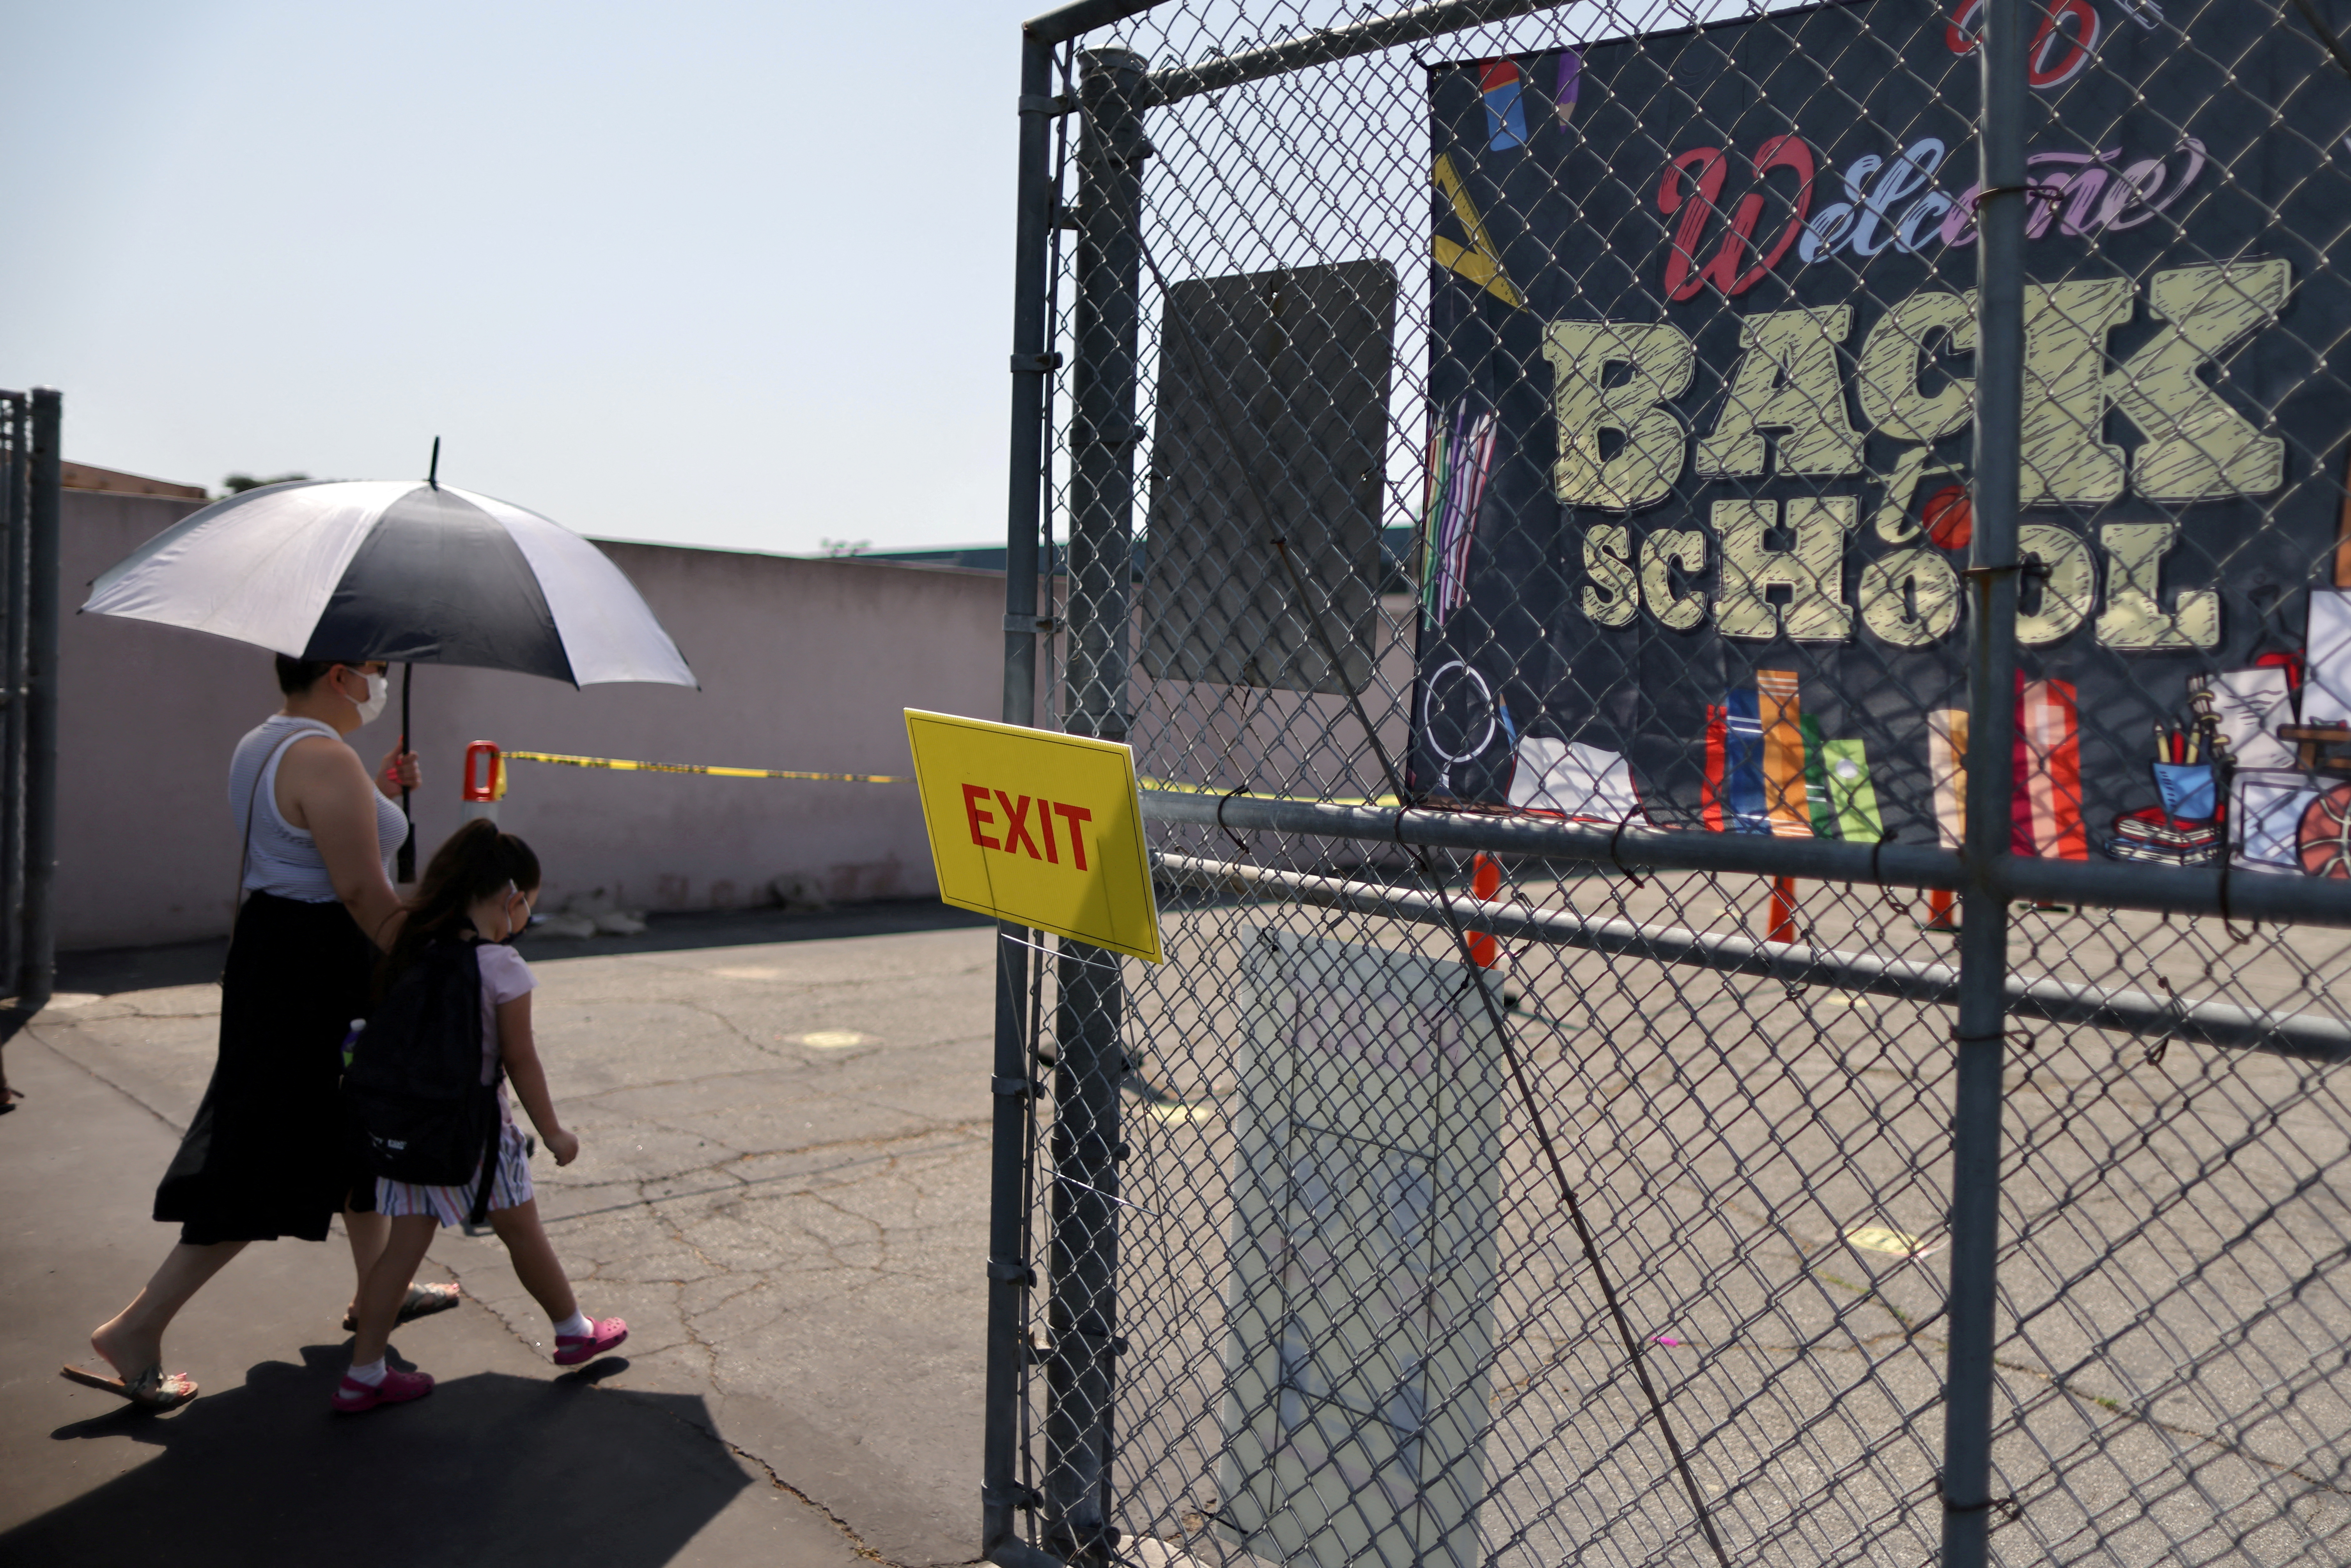 Sonia Vasquez, 39, and her daughter Angelique Sepulveda, 4, leave a back-to-school clinic for coronavirus disease (COVID-19) testing, vaccines, and free backpacks in South Gate, Los Angeles, California, U.S., August 12, 2021. REUTERS/Lucy Nicholson/File Photo